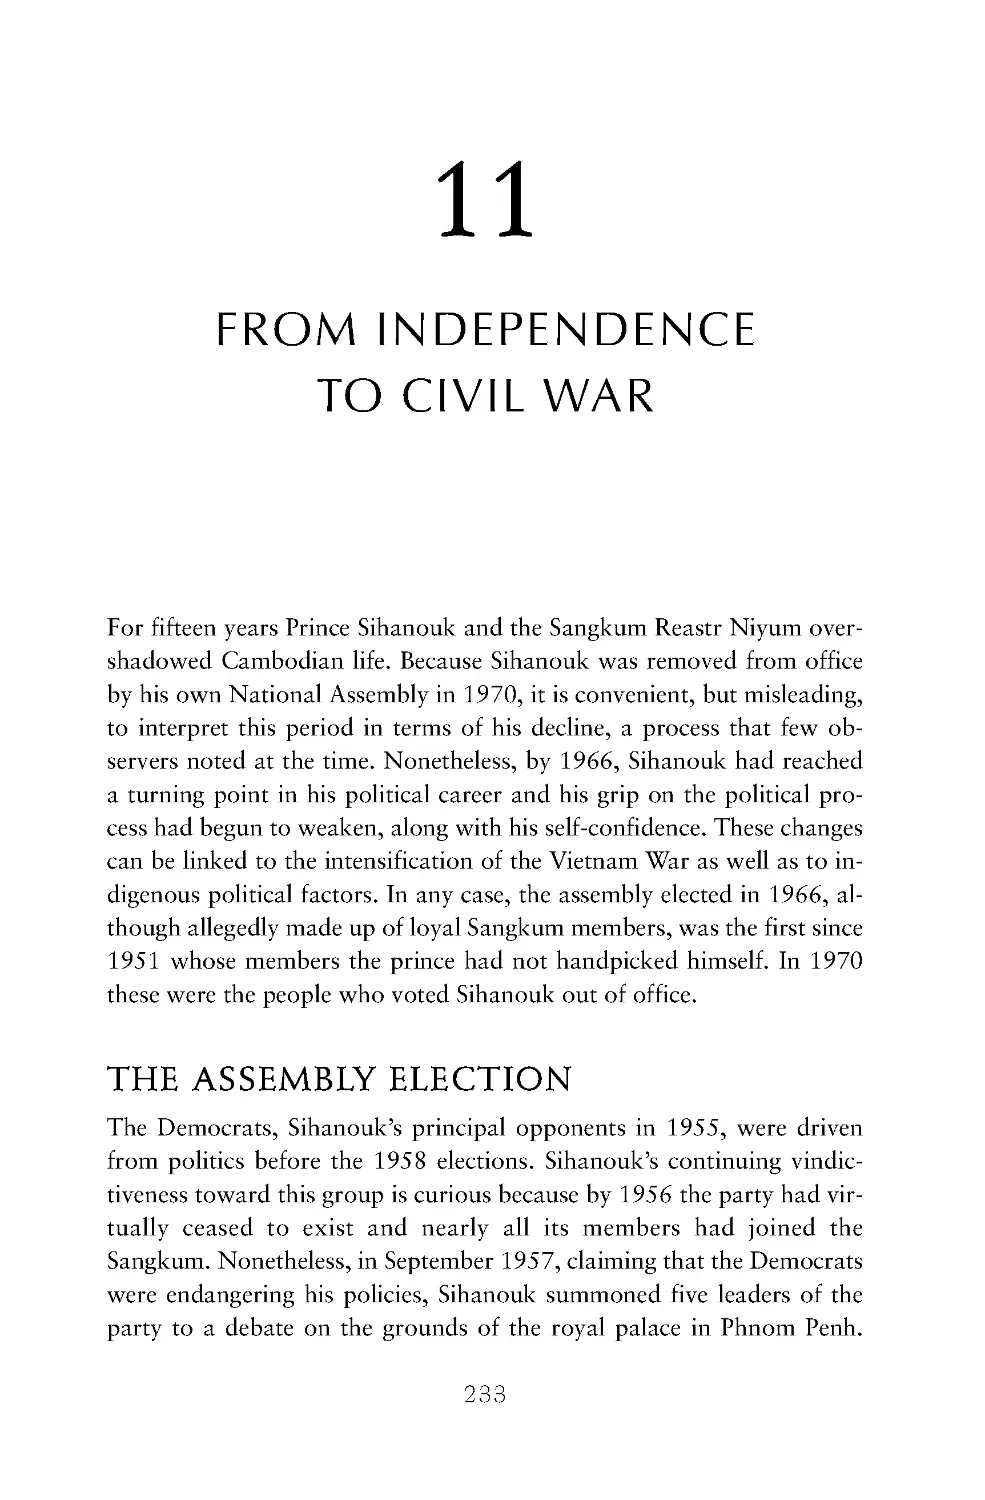 11. From Independence to Civil War